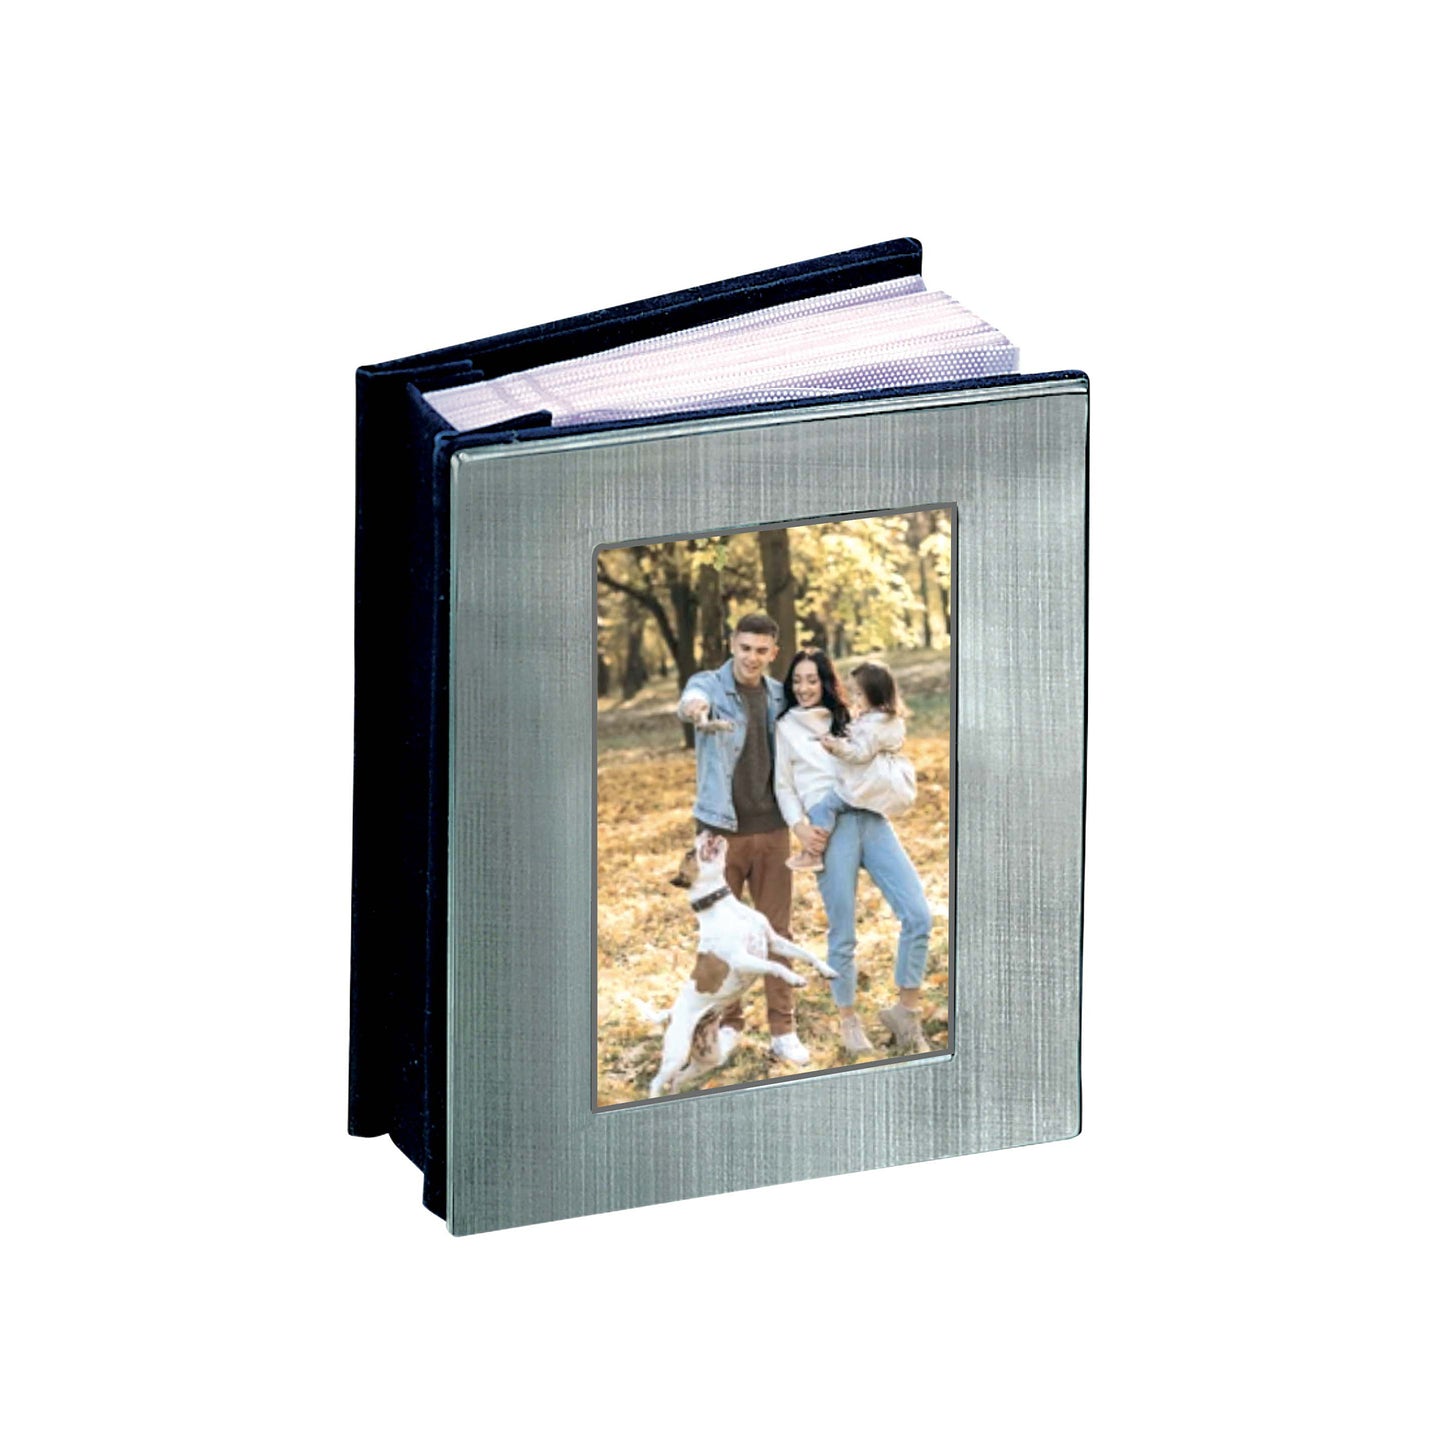 Matte Finish Album with Frame Style Cover